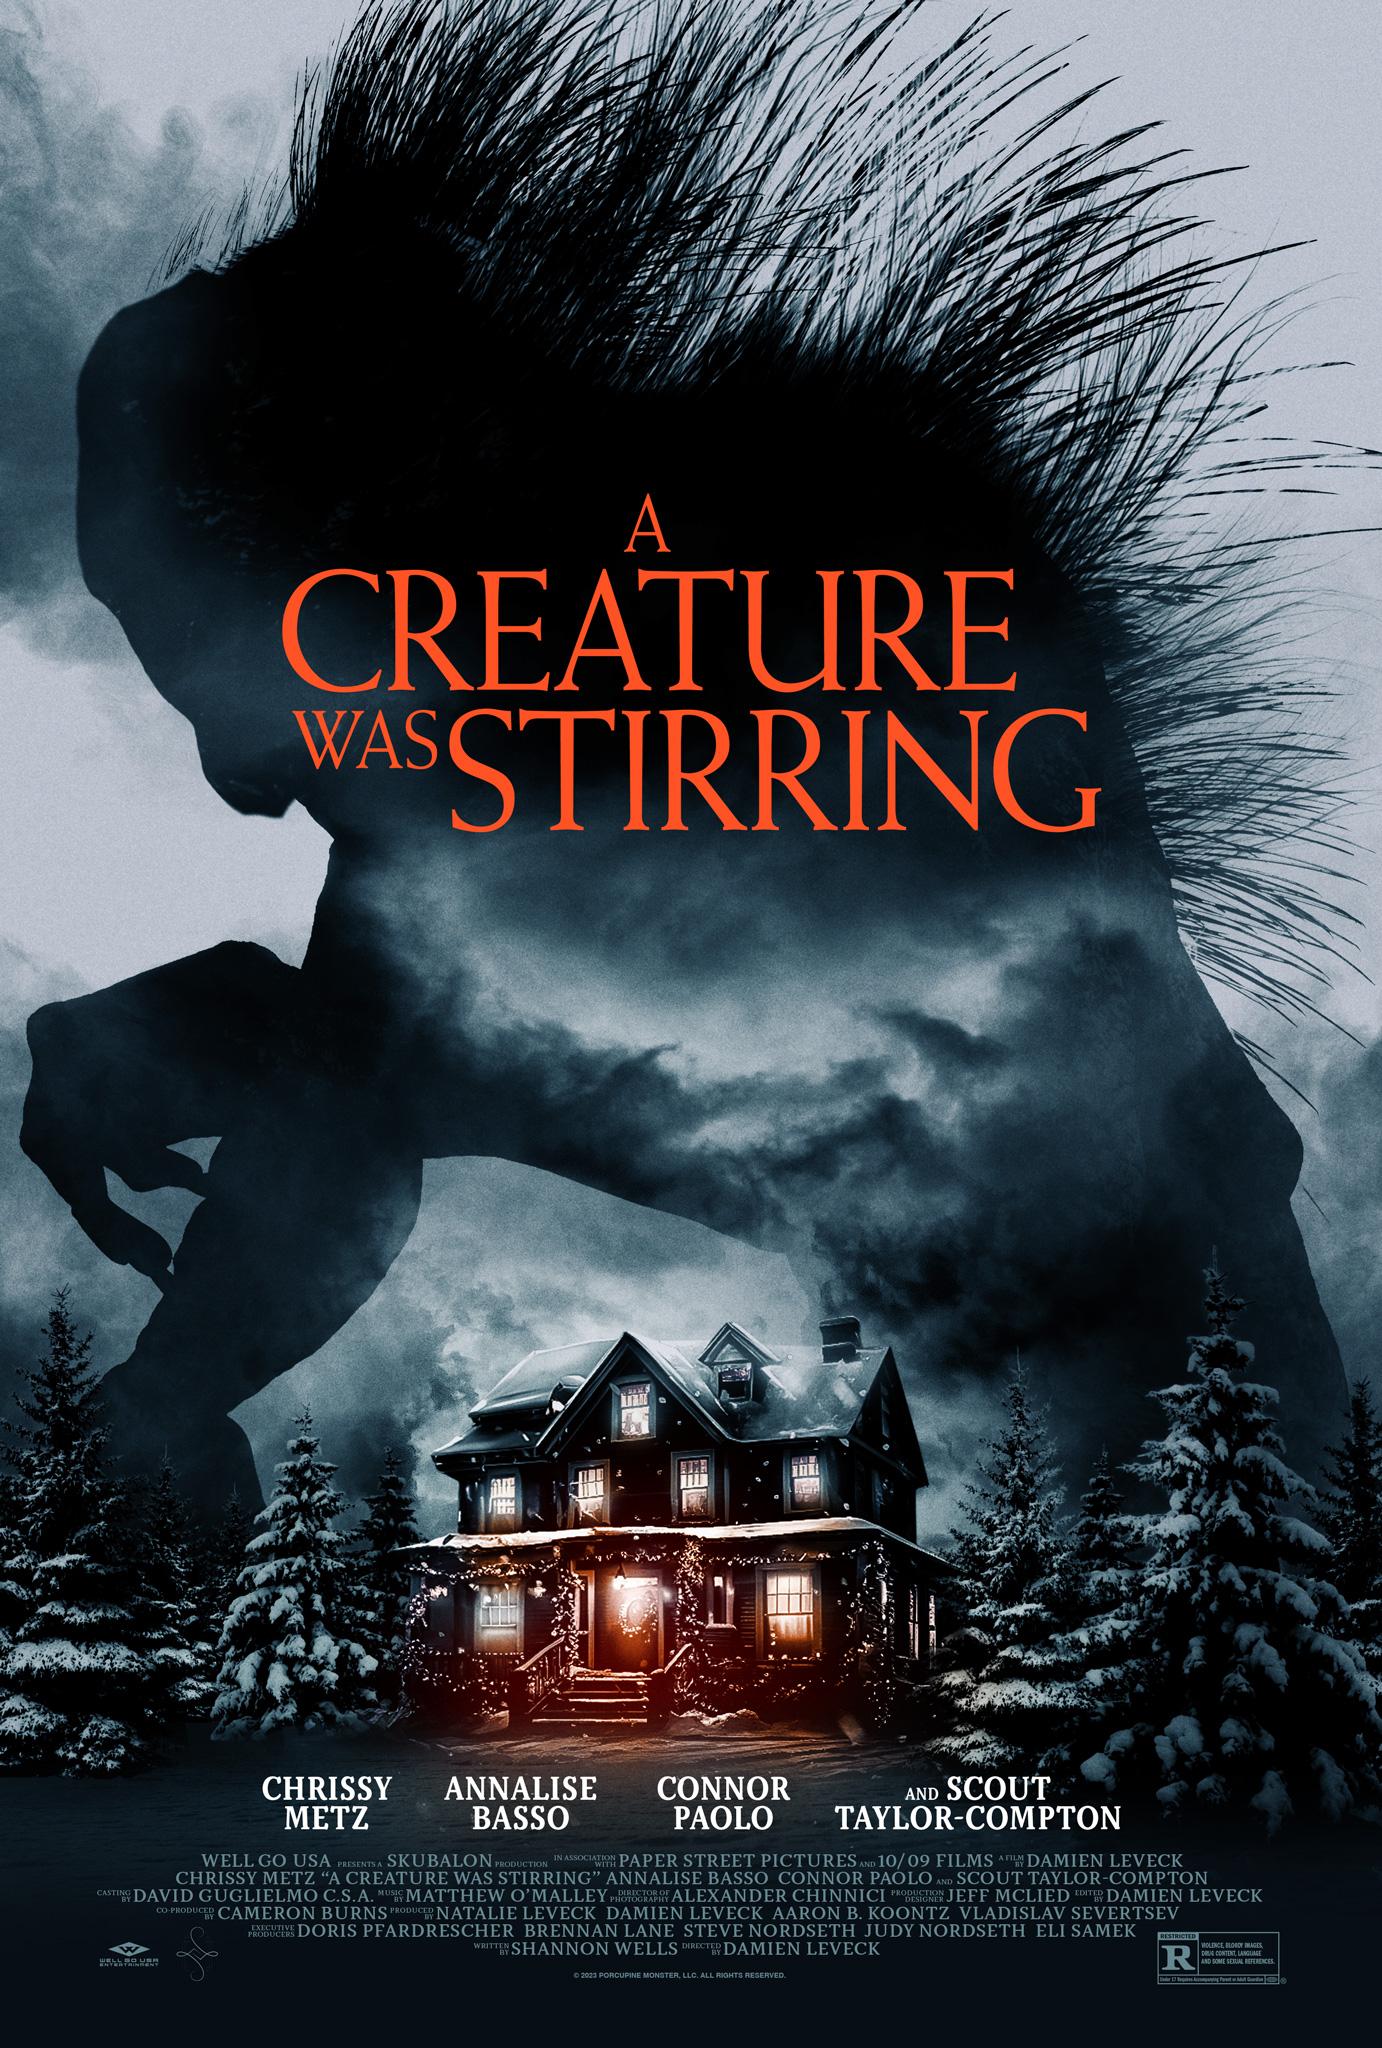 "A Creature Was Stirring Trailer & Poster